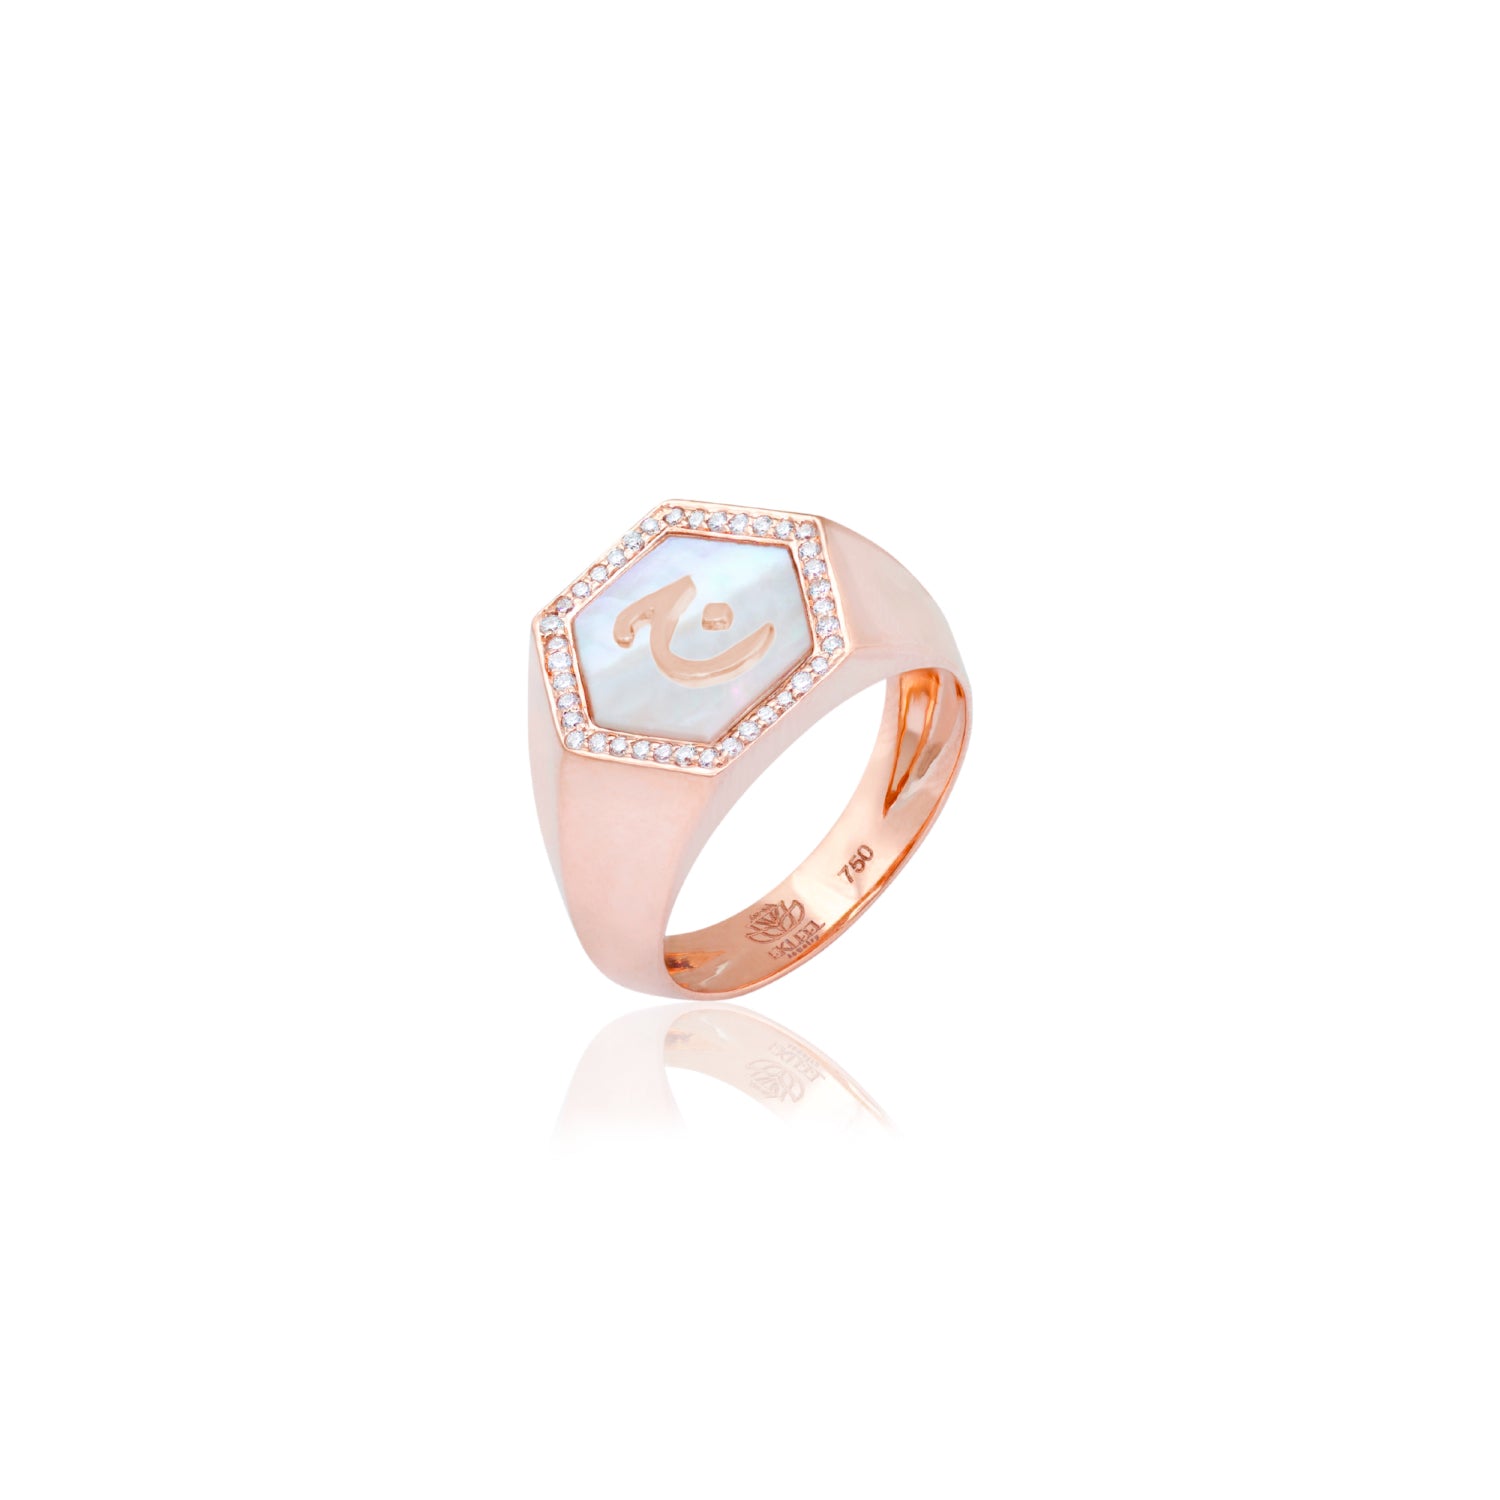 Qamoos 2.0 Letter ج White Mother of Pearl and Diamond Signet Ring in Rose Gold